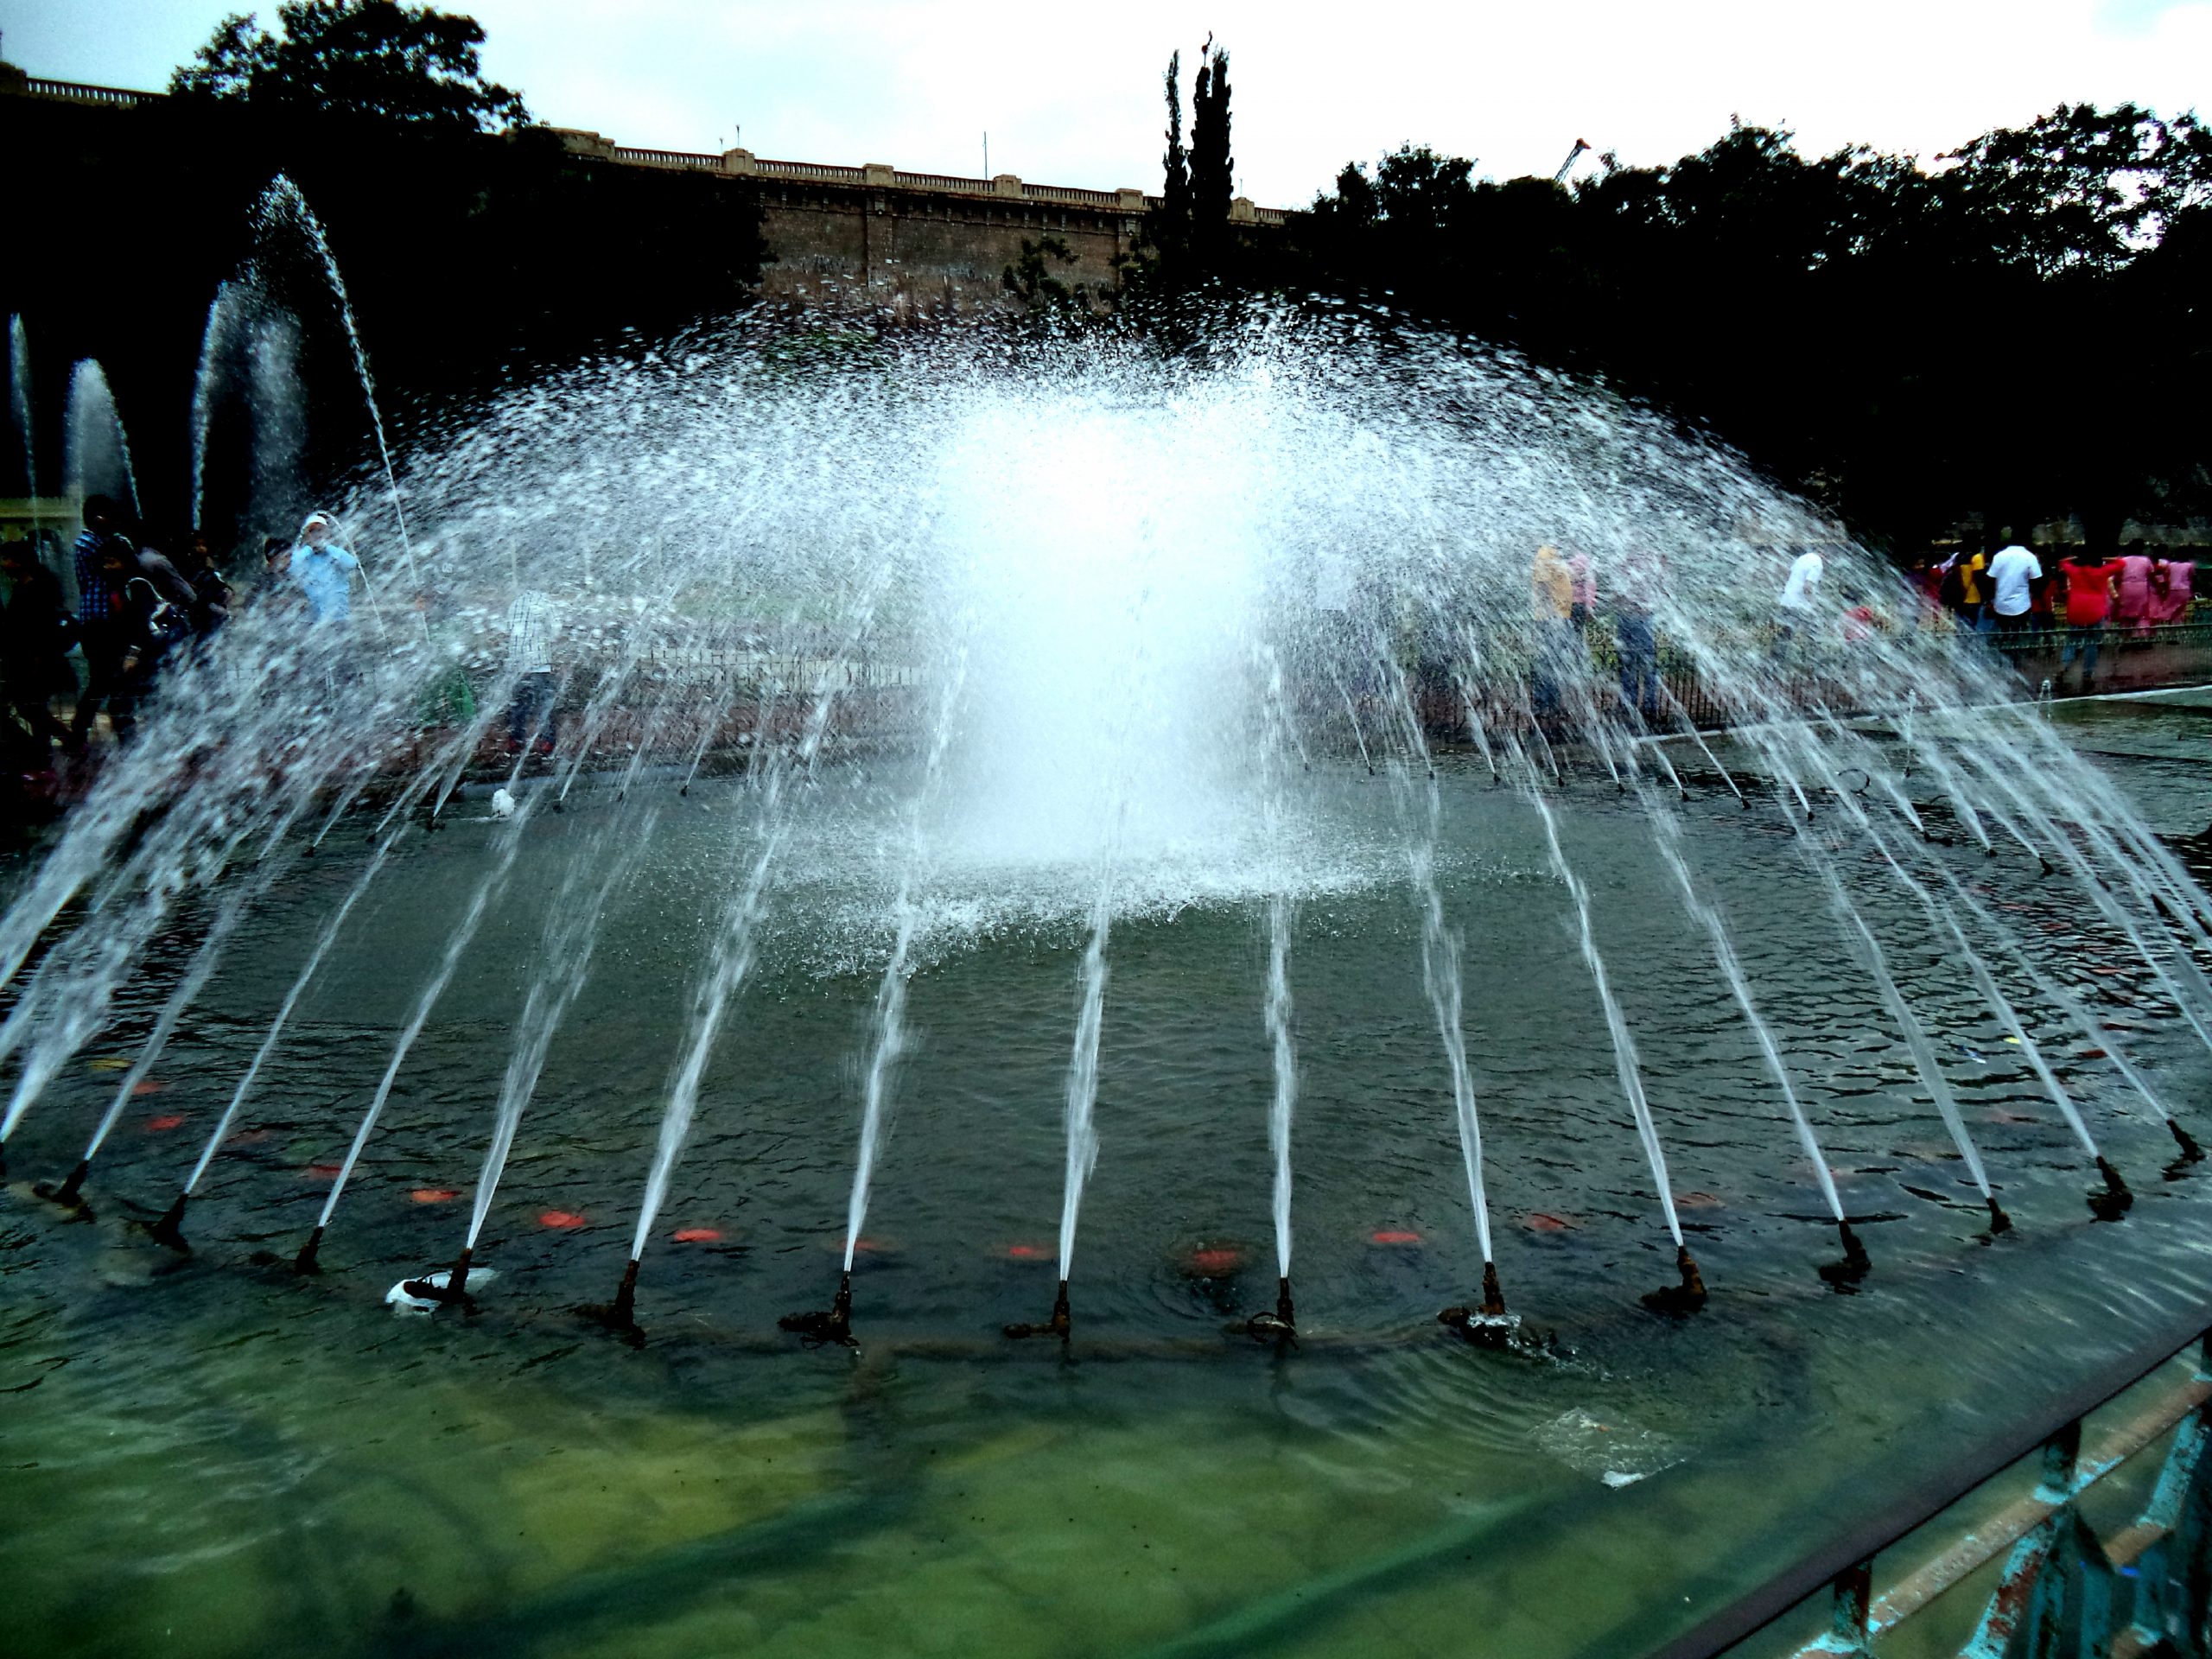 A water fountain in a park